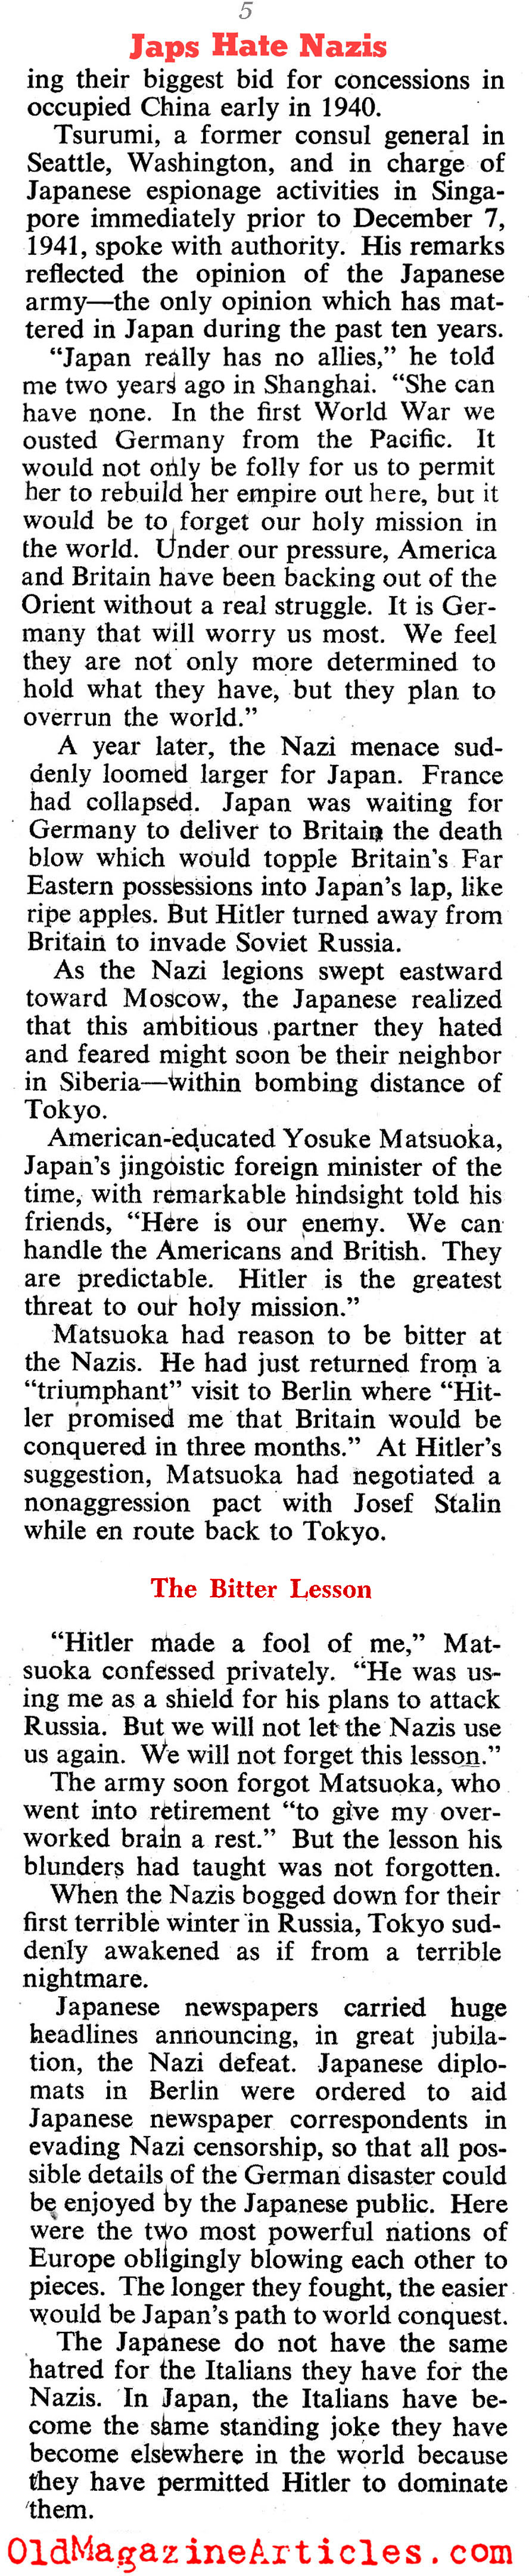 The Japanese Did Not Like The Germans (Collier's Magazine, 1943)